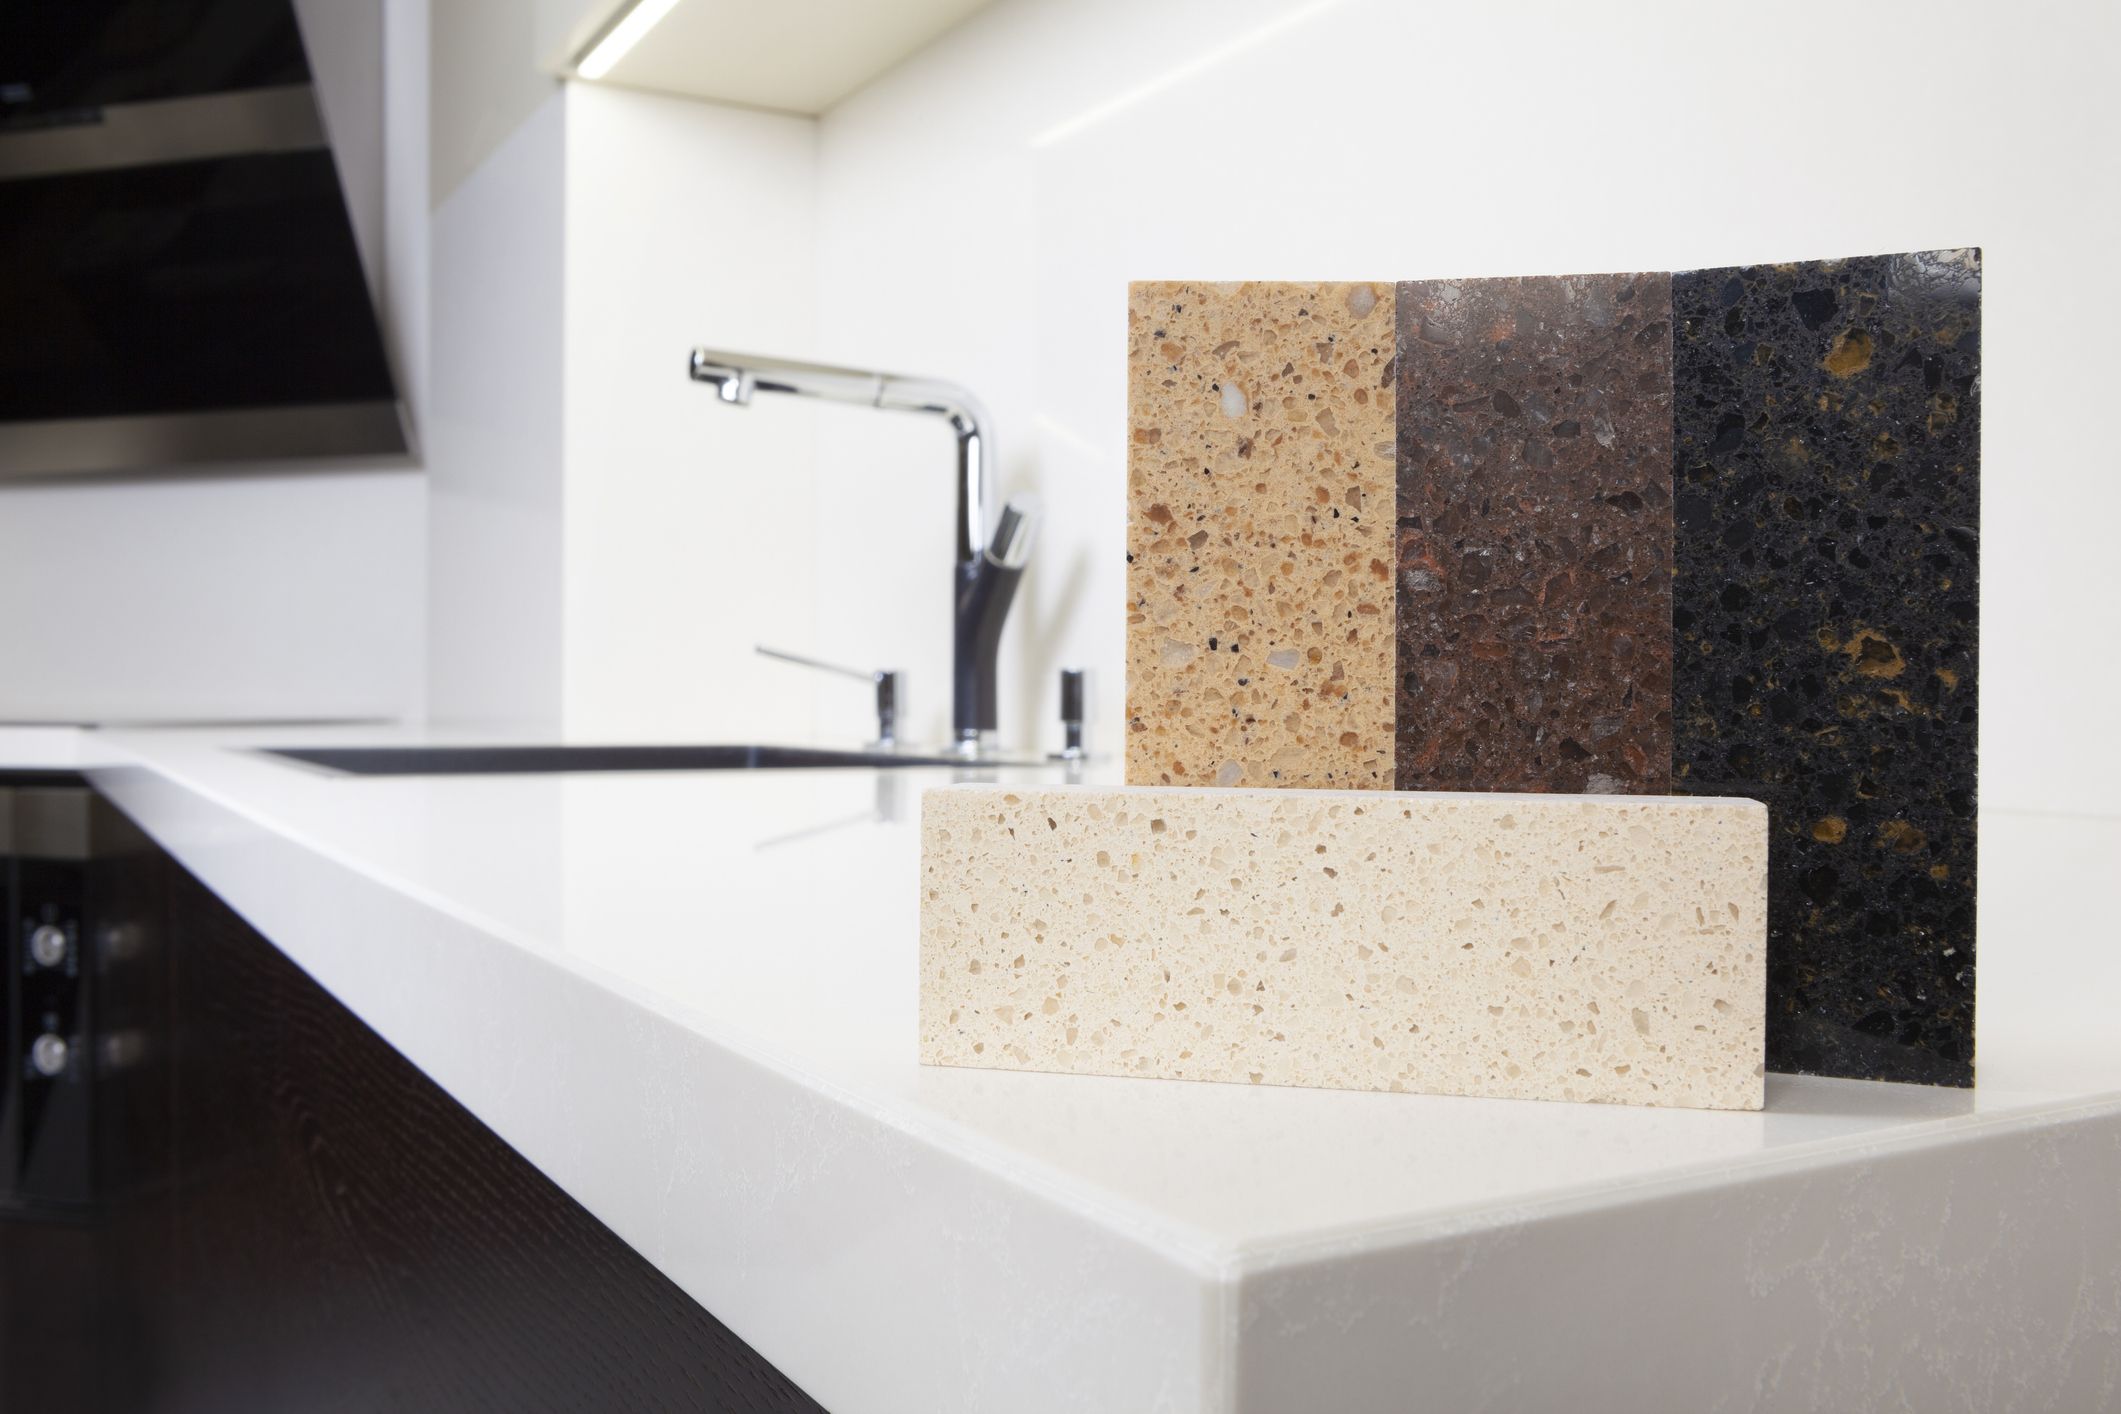 Types of Countertop | The Best Countertop Options for Kitchens